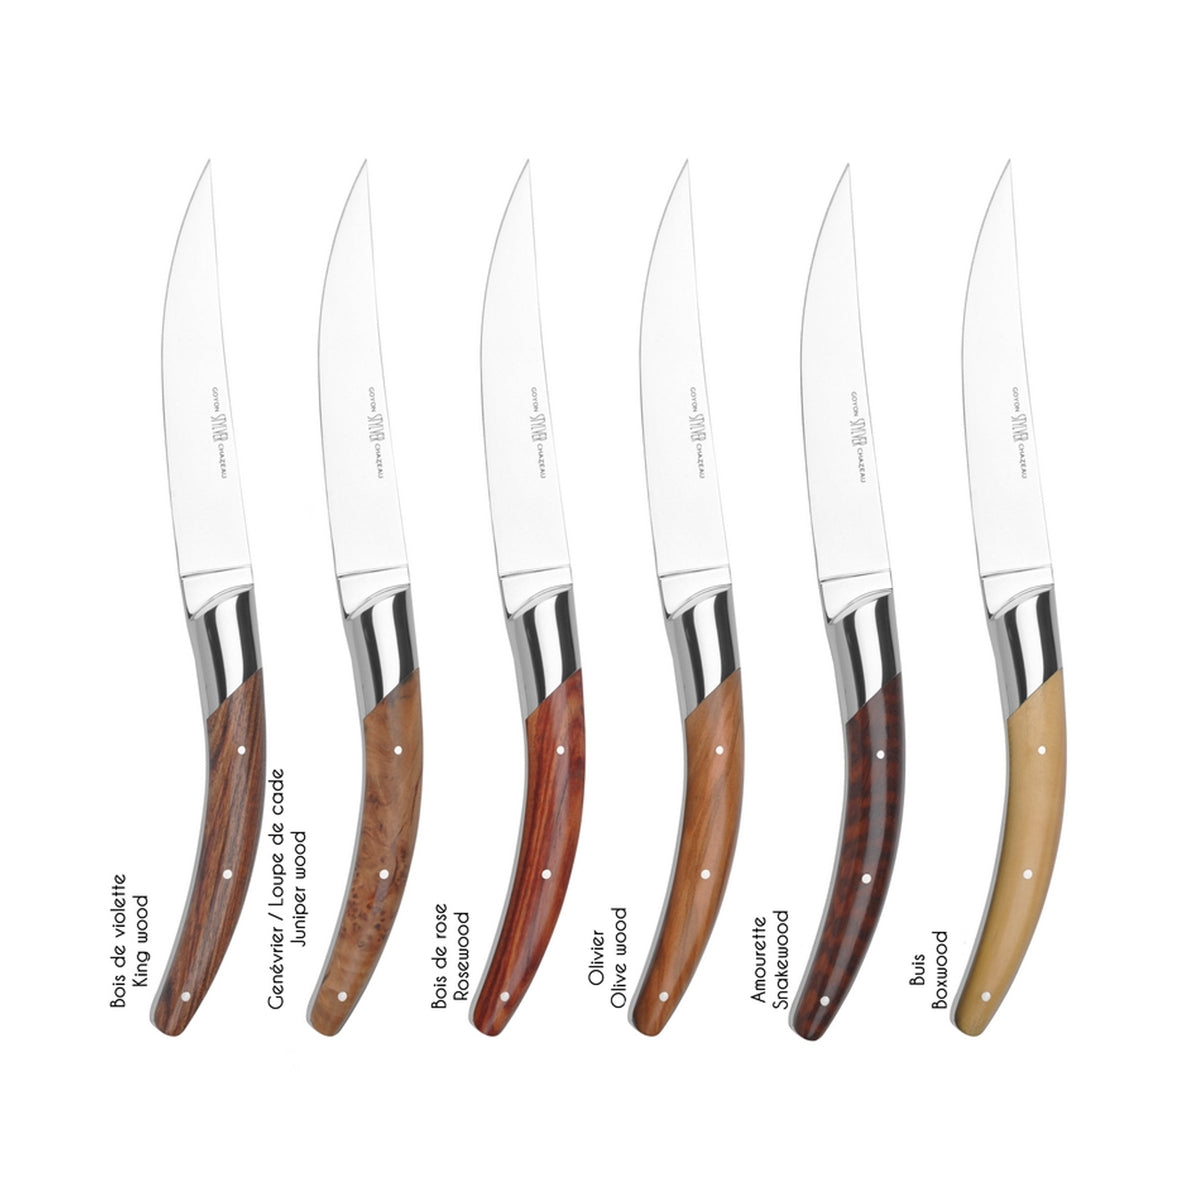 A Goyon-Chazeau Styl&#39;ver Mixed Wood Steak Knives Boxed Set/6 with different colors and woods from France.